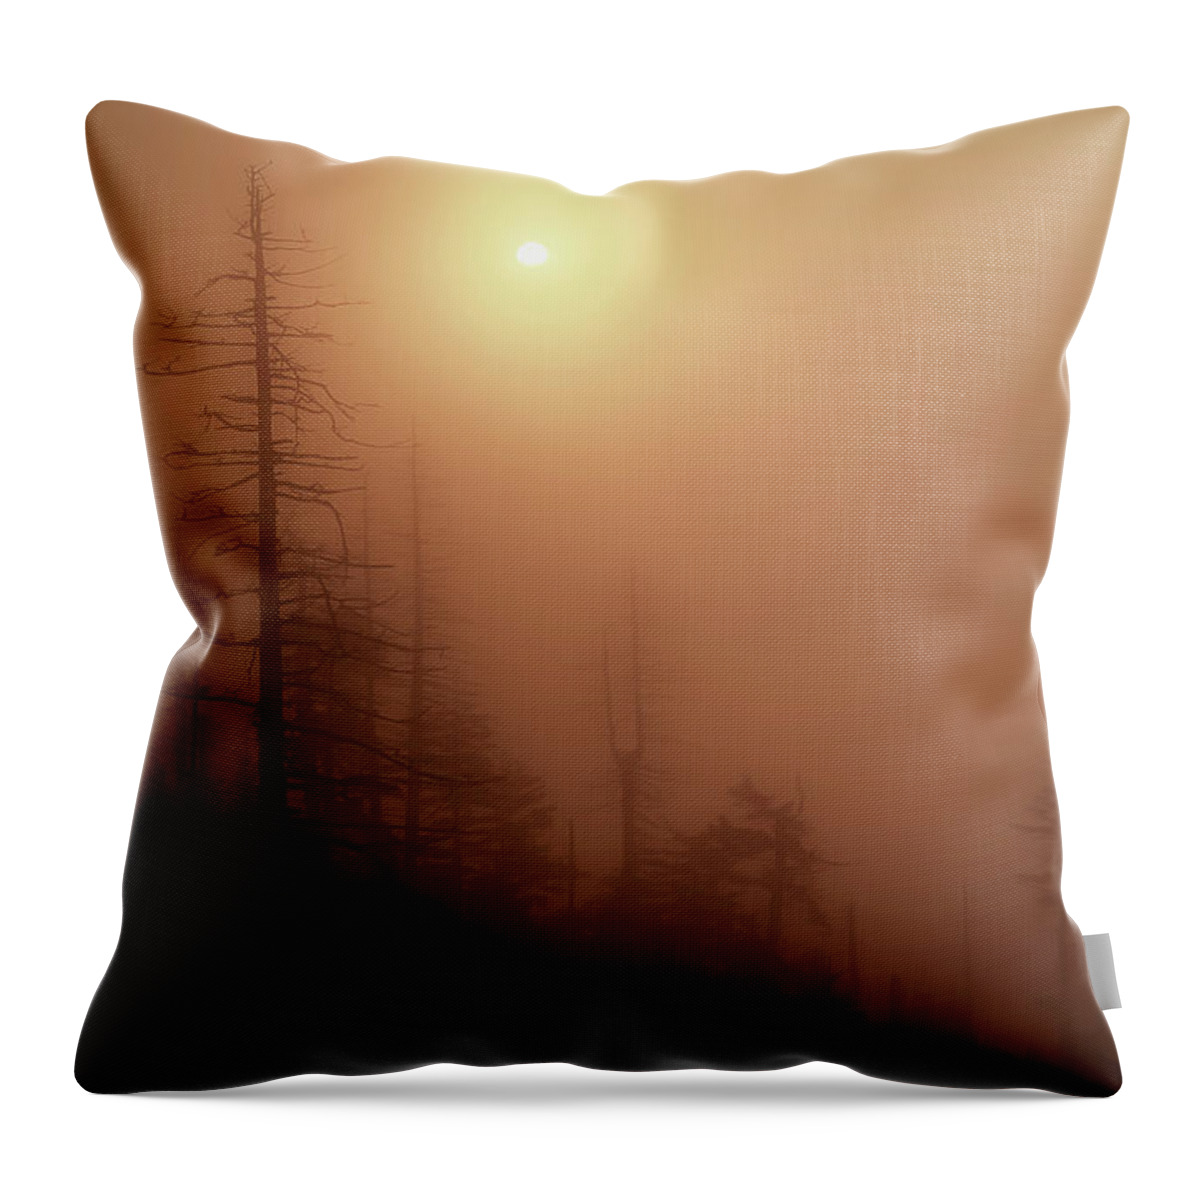 Fog Scene Throw Pillow featuring the photograph Morning On The Mountain by Mike Eingle